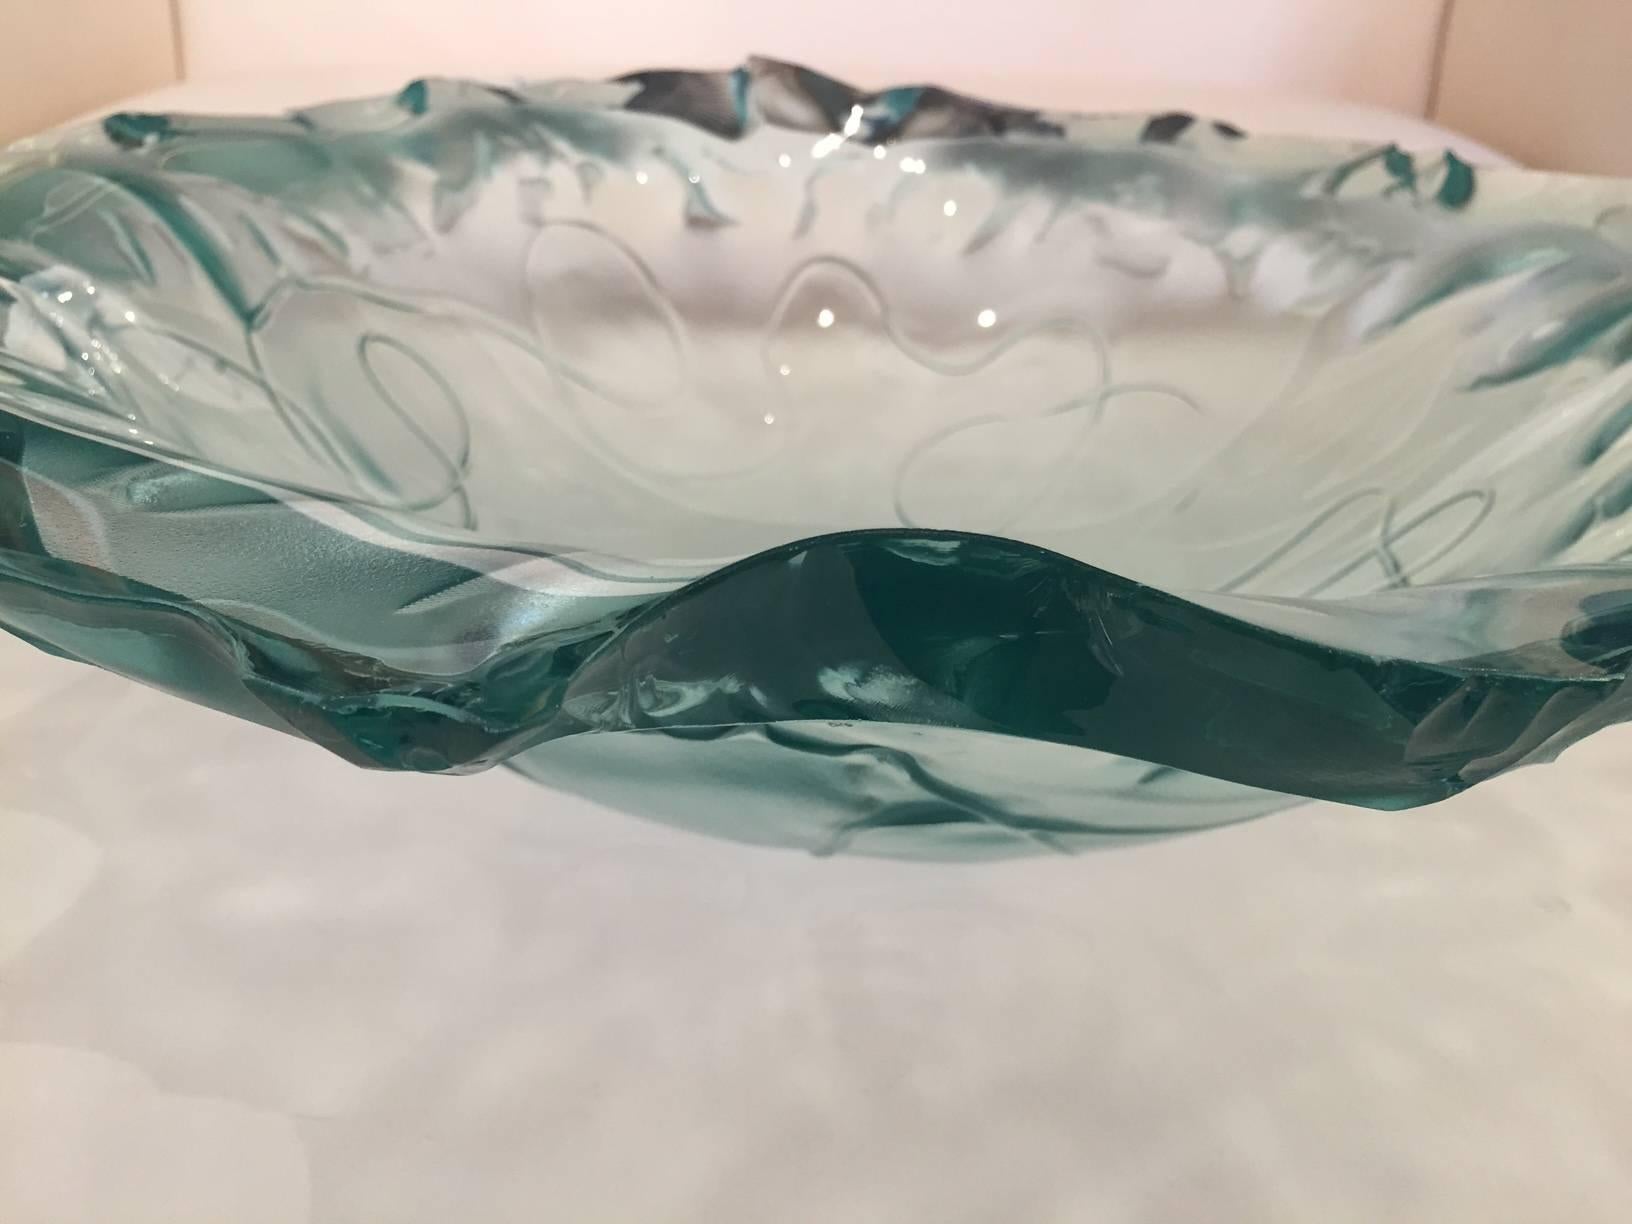 Heavy greenish tinted art glass bowl with beautiful irregular scalloped edges, signed by artist.